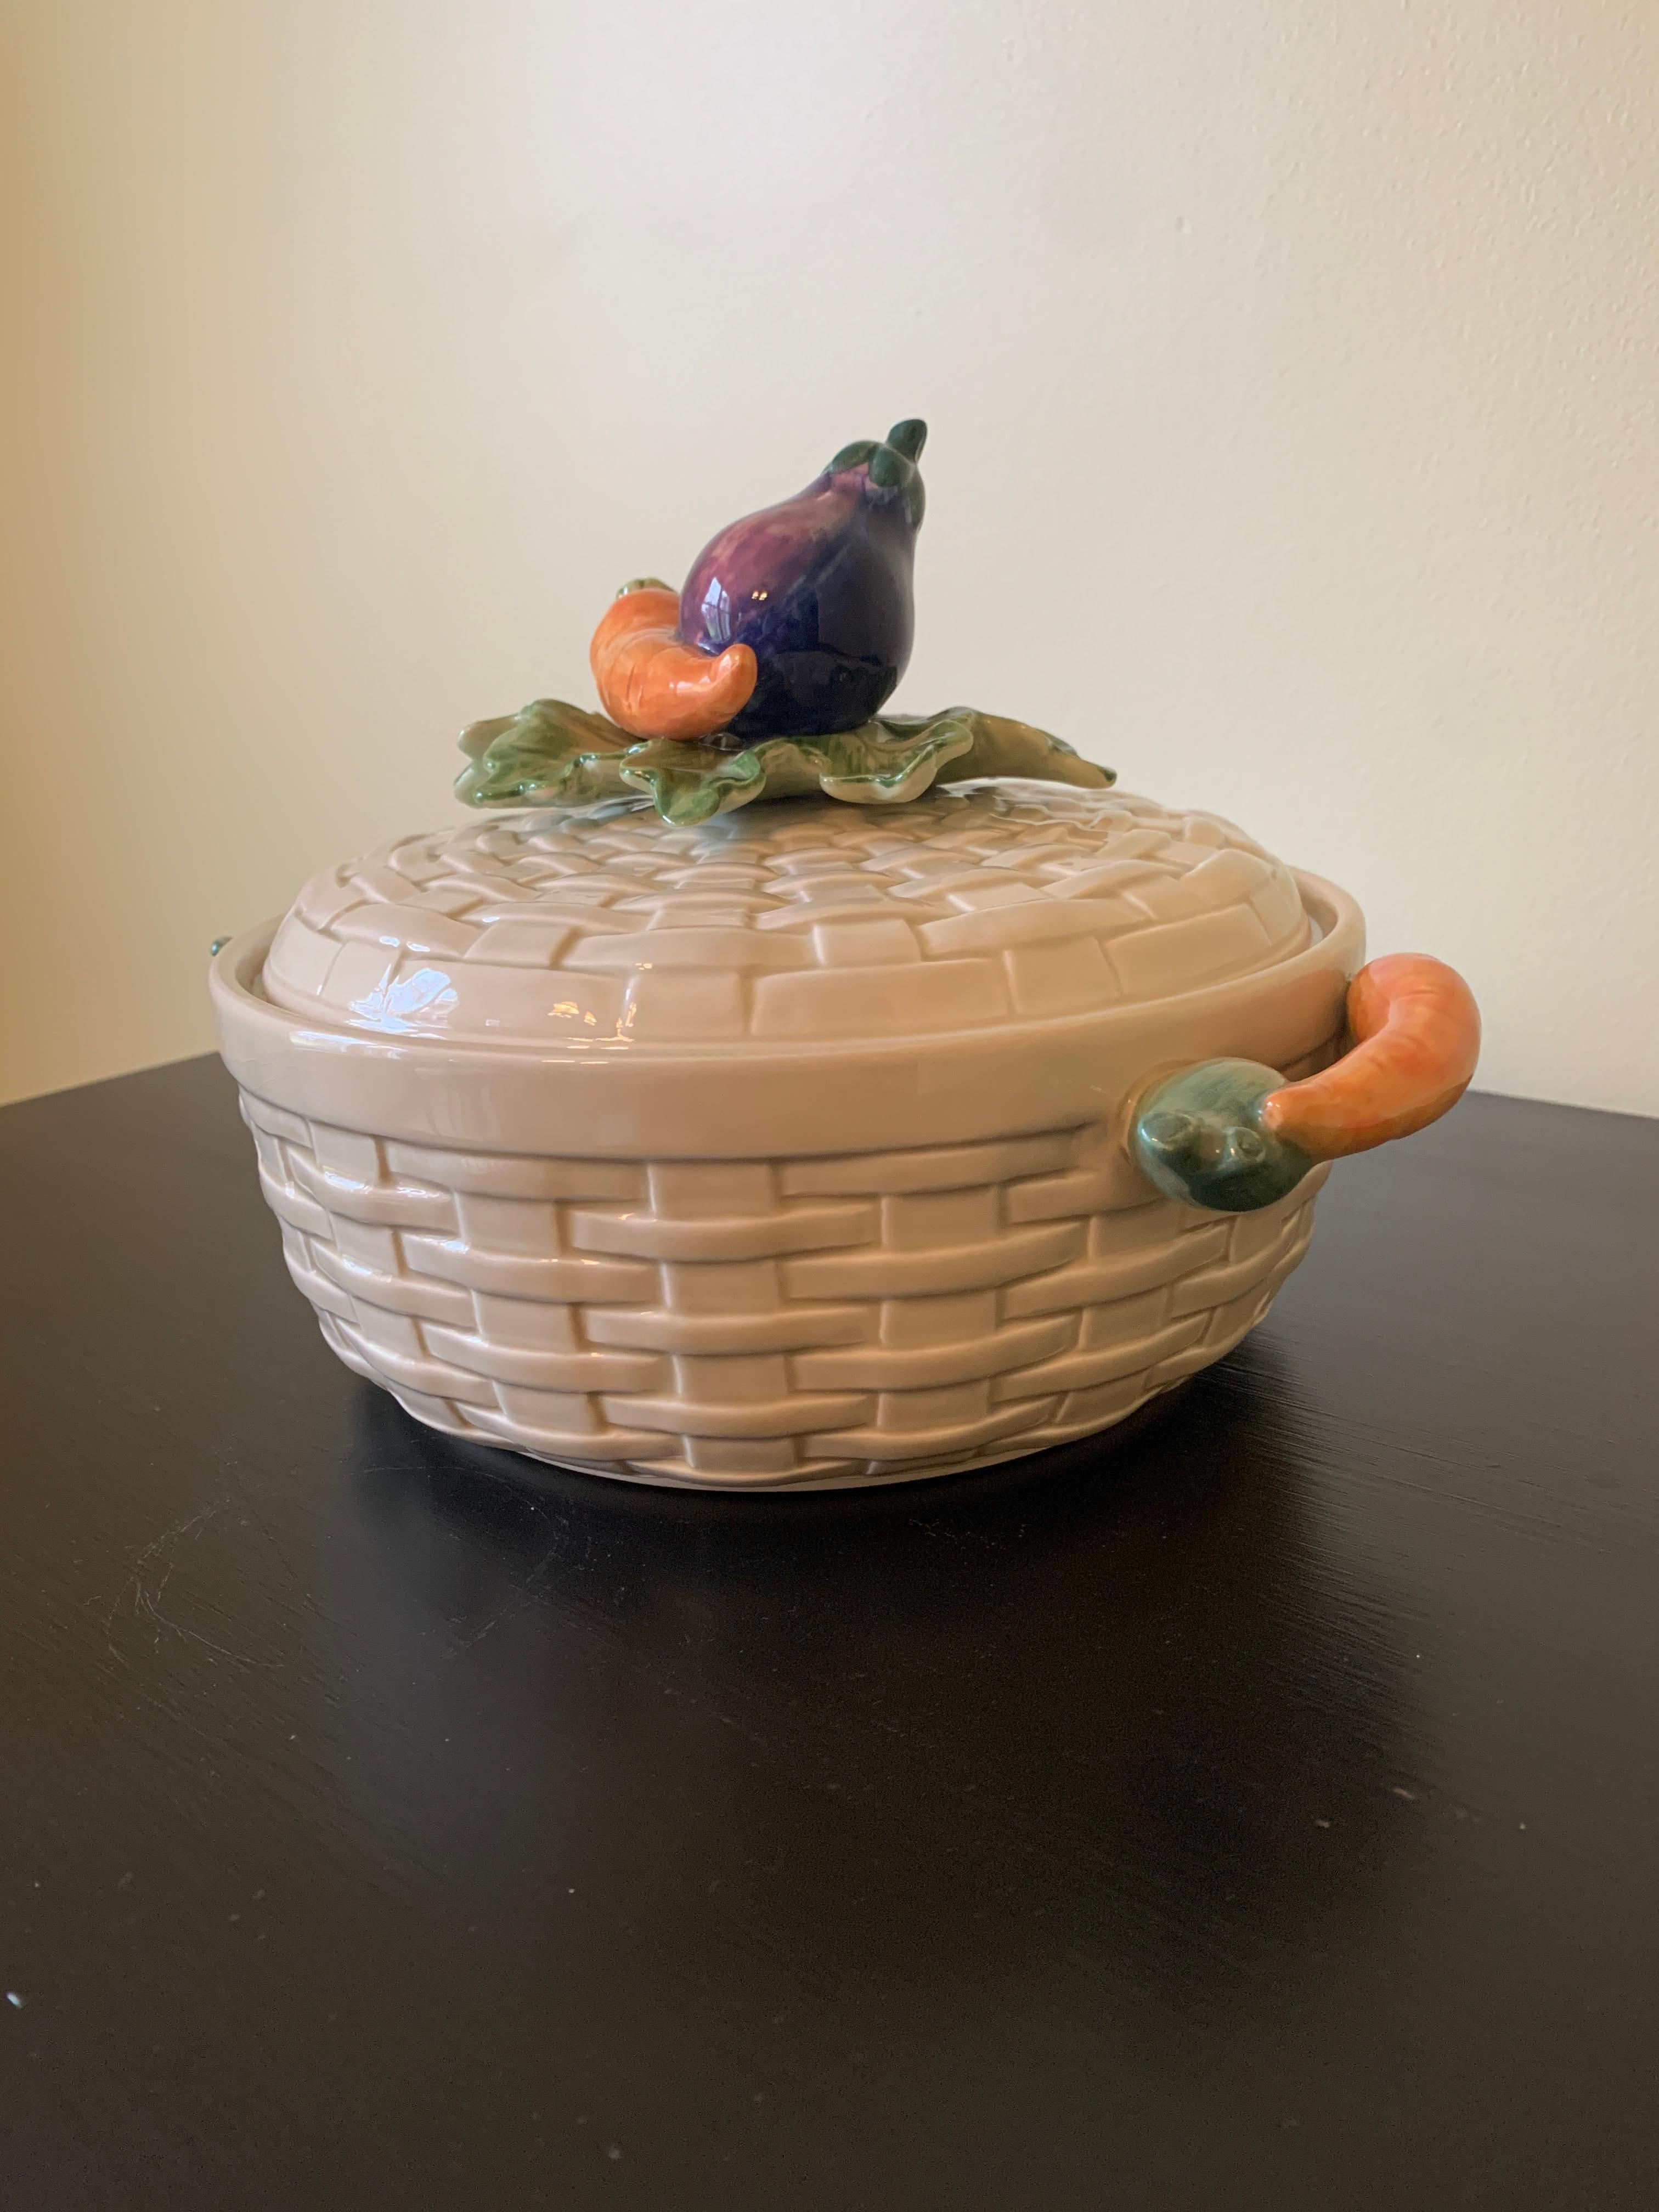 Country Fitz & Floyd Glazed Ceramic Trompe l'Oeil Woven Basket With Vegetables Casserole For Sale